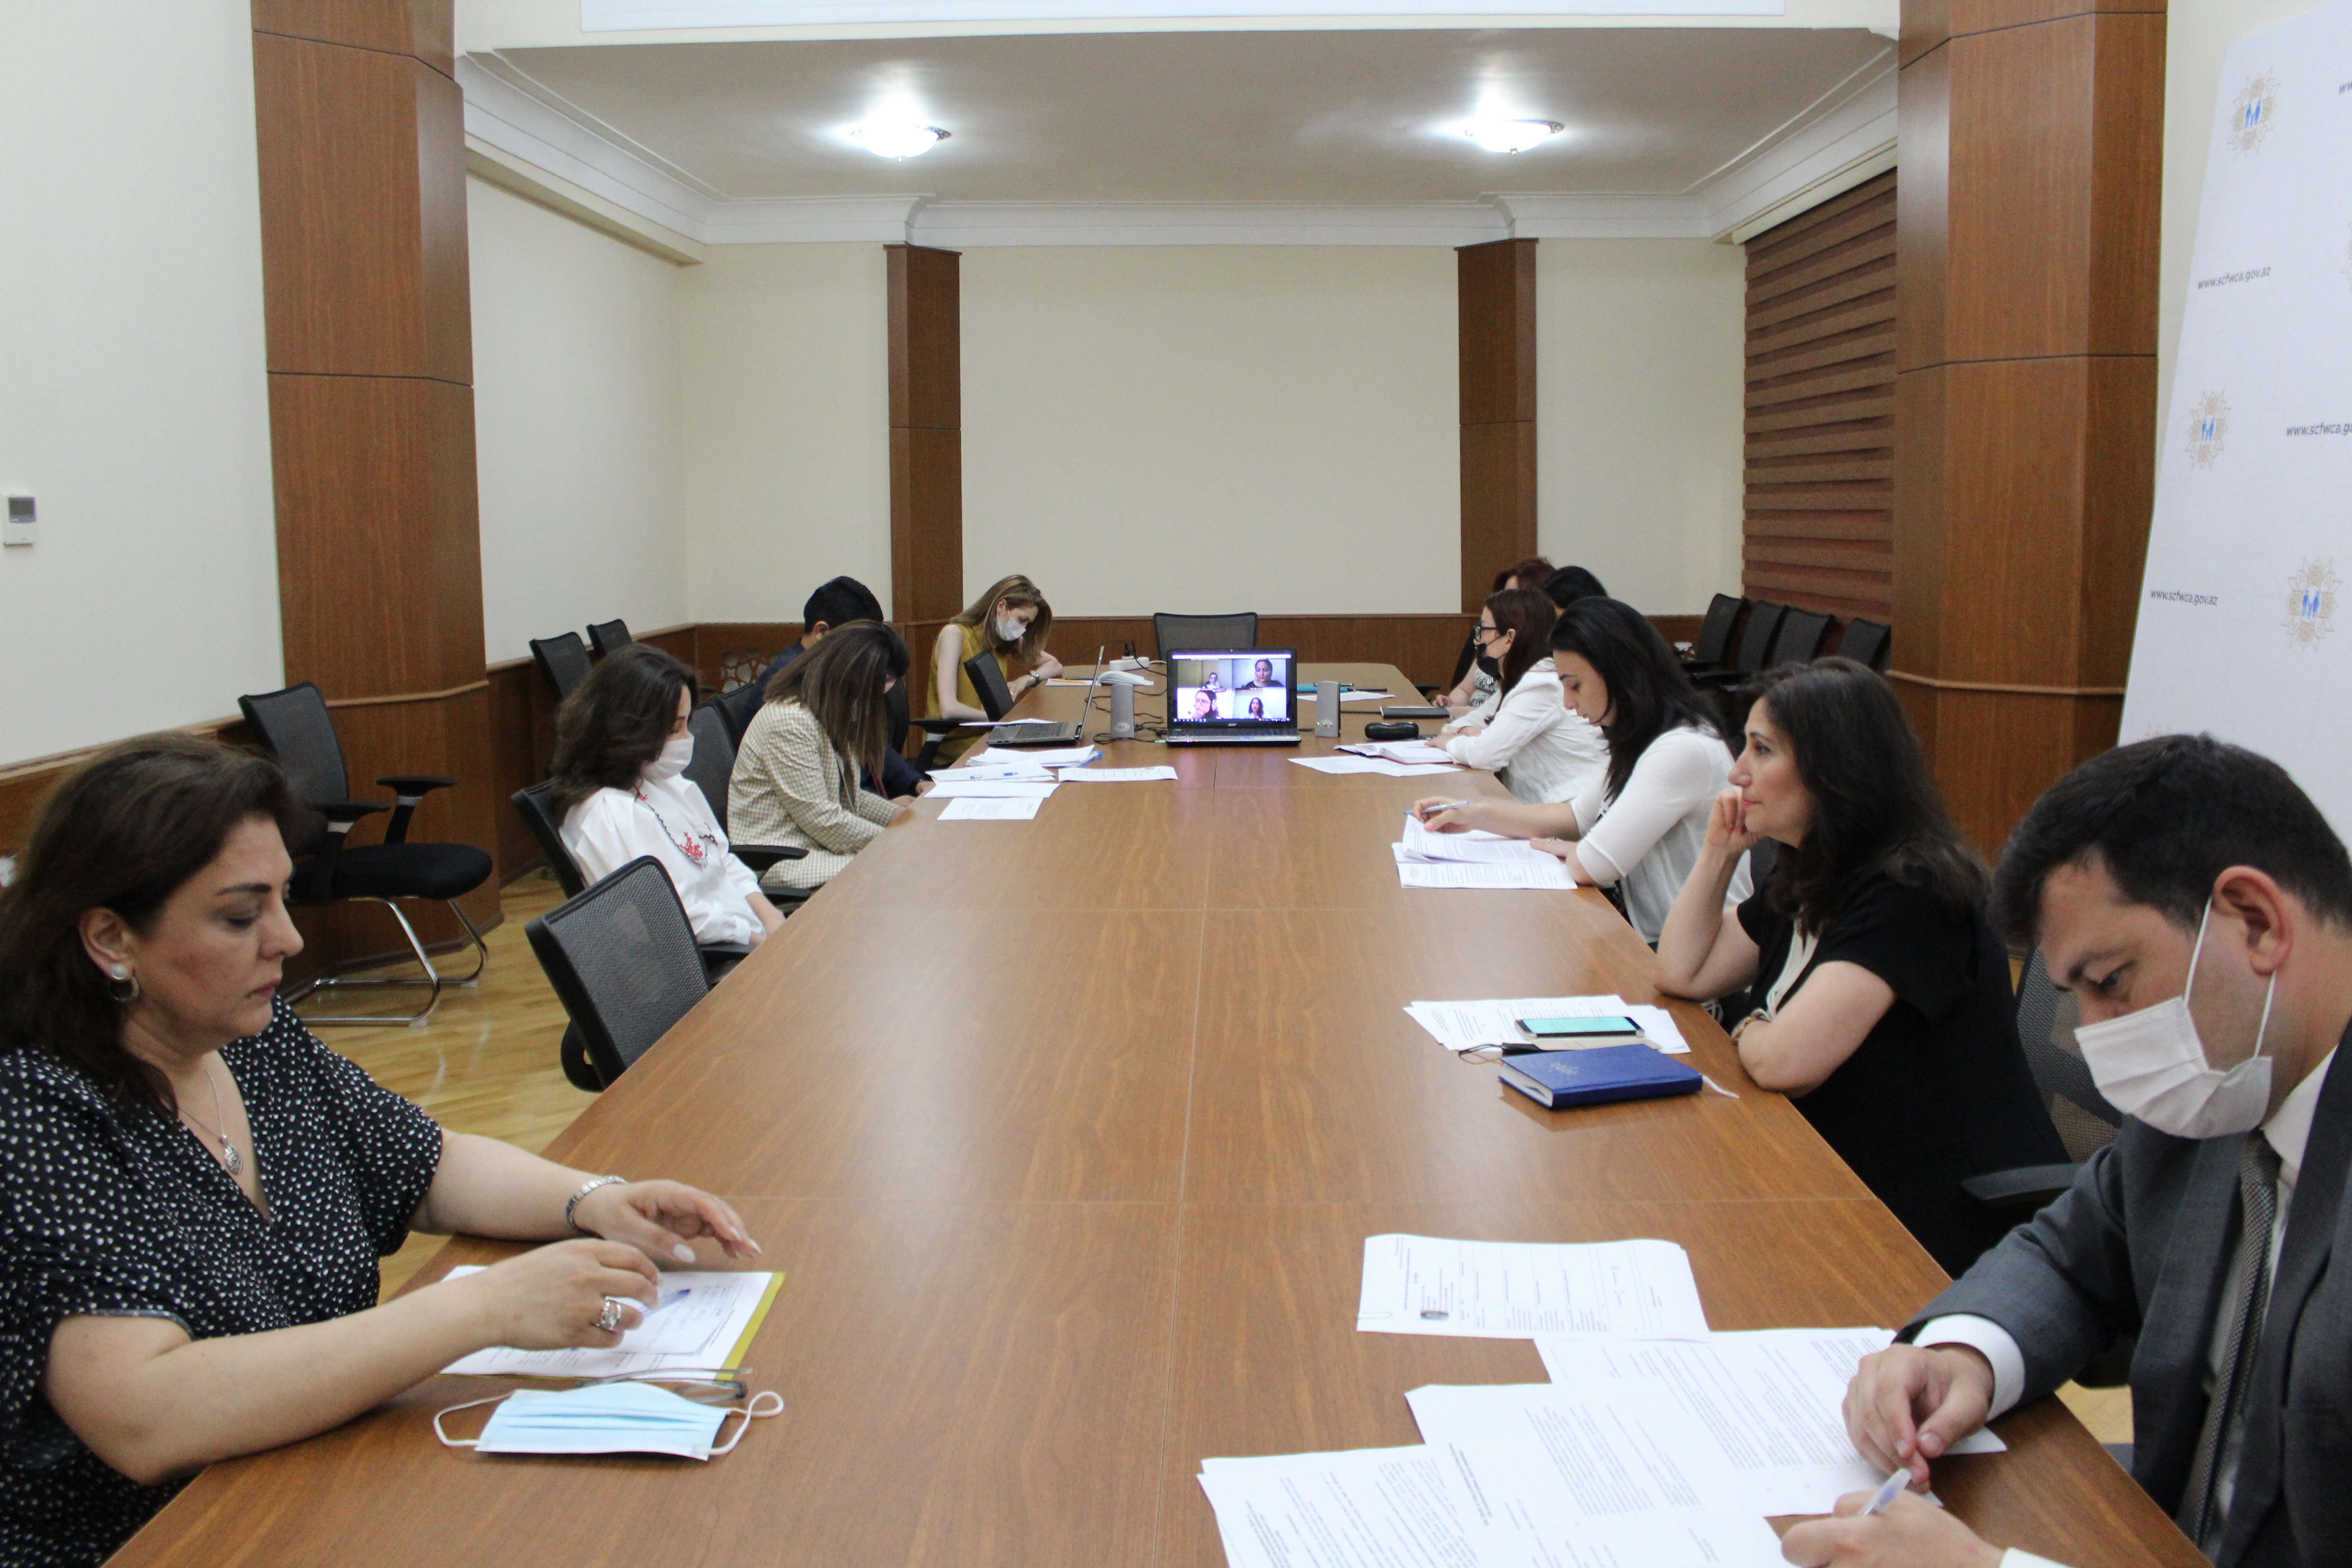 A meeting of the Appeals Board of the State Committee was held